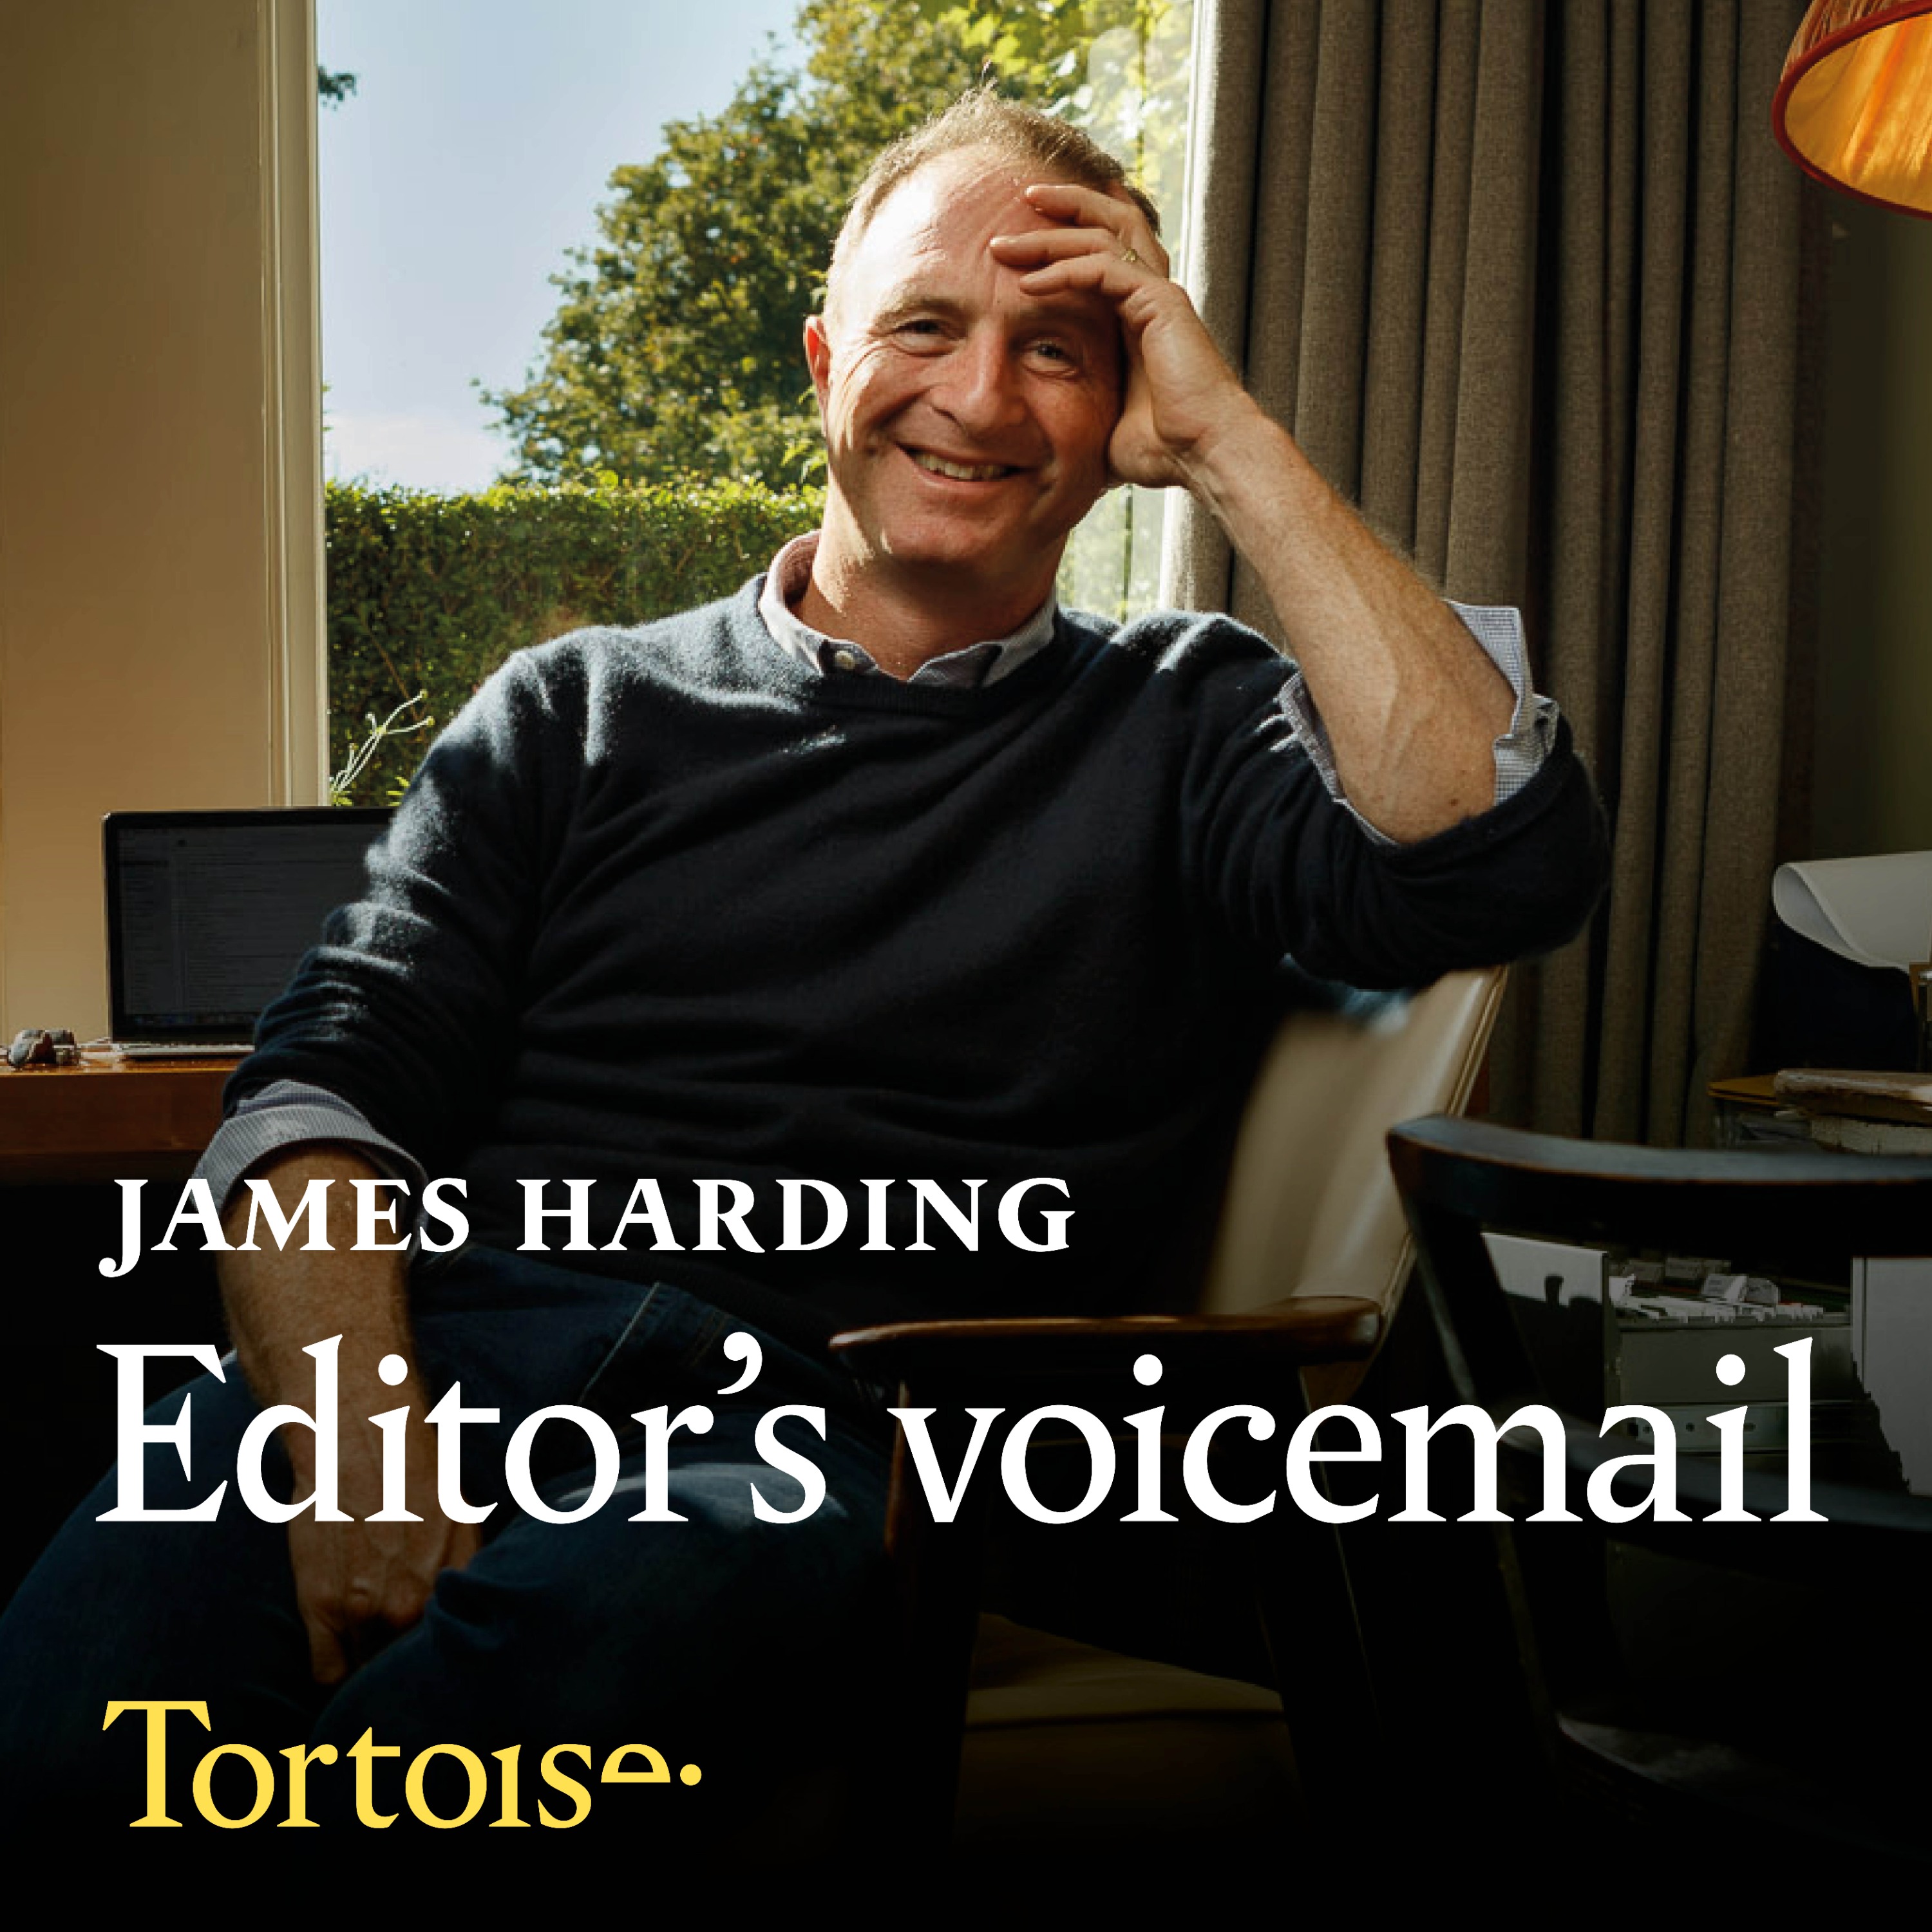 Editor's Voicemail: The course for change